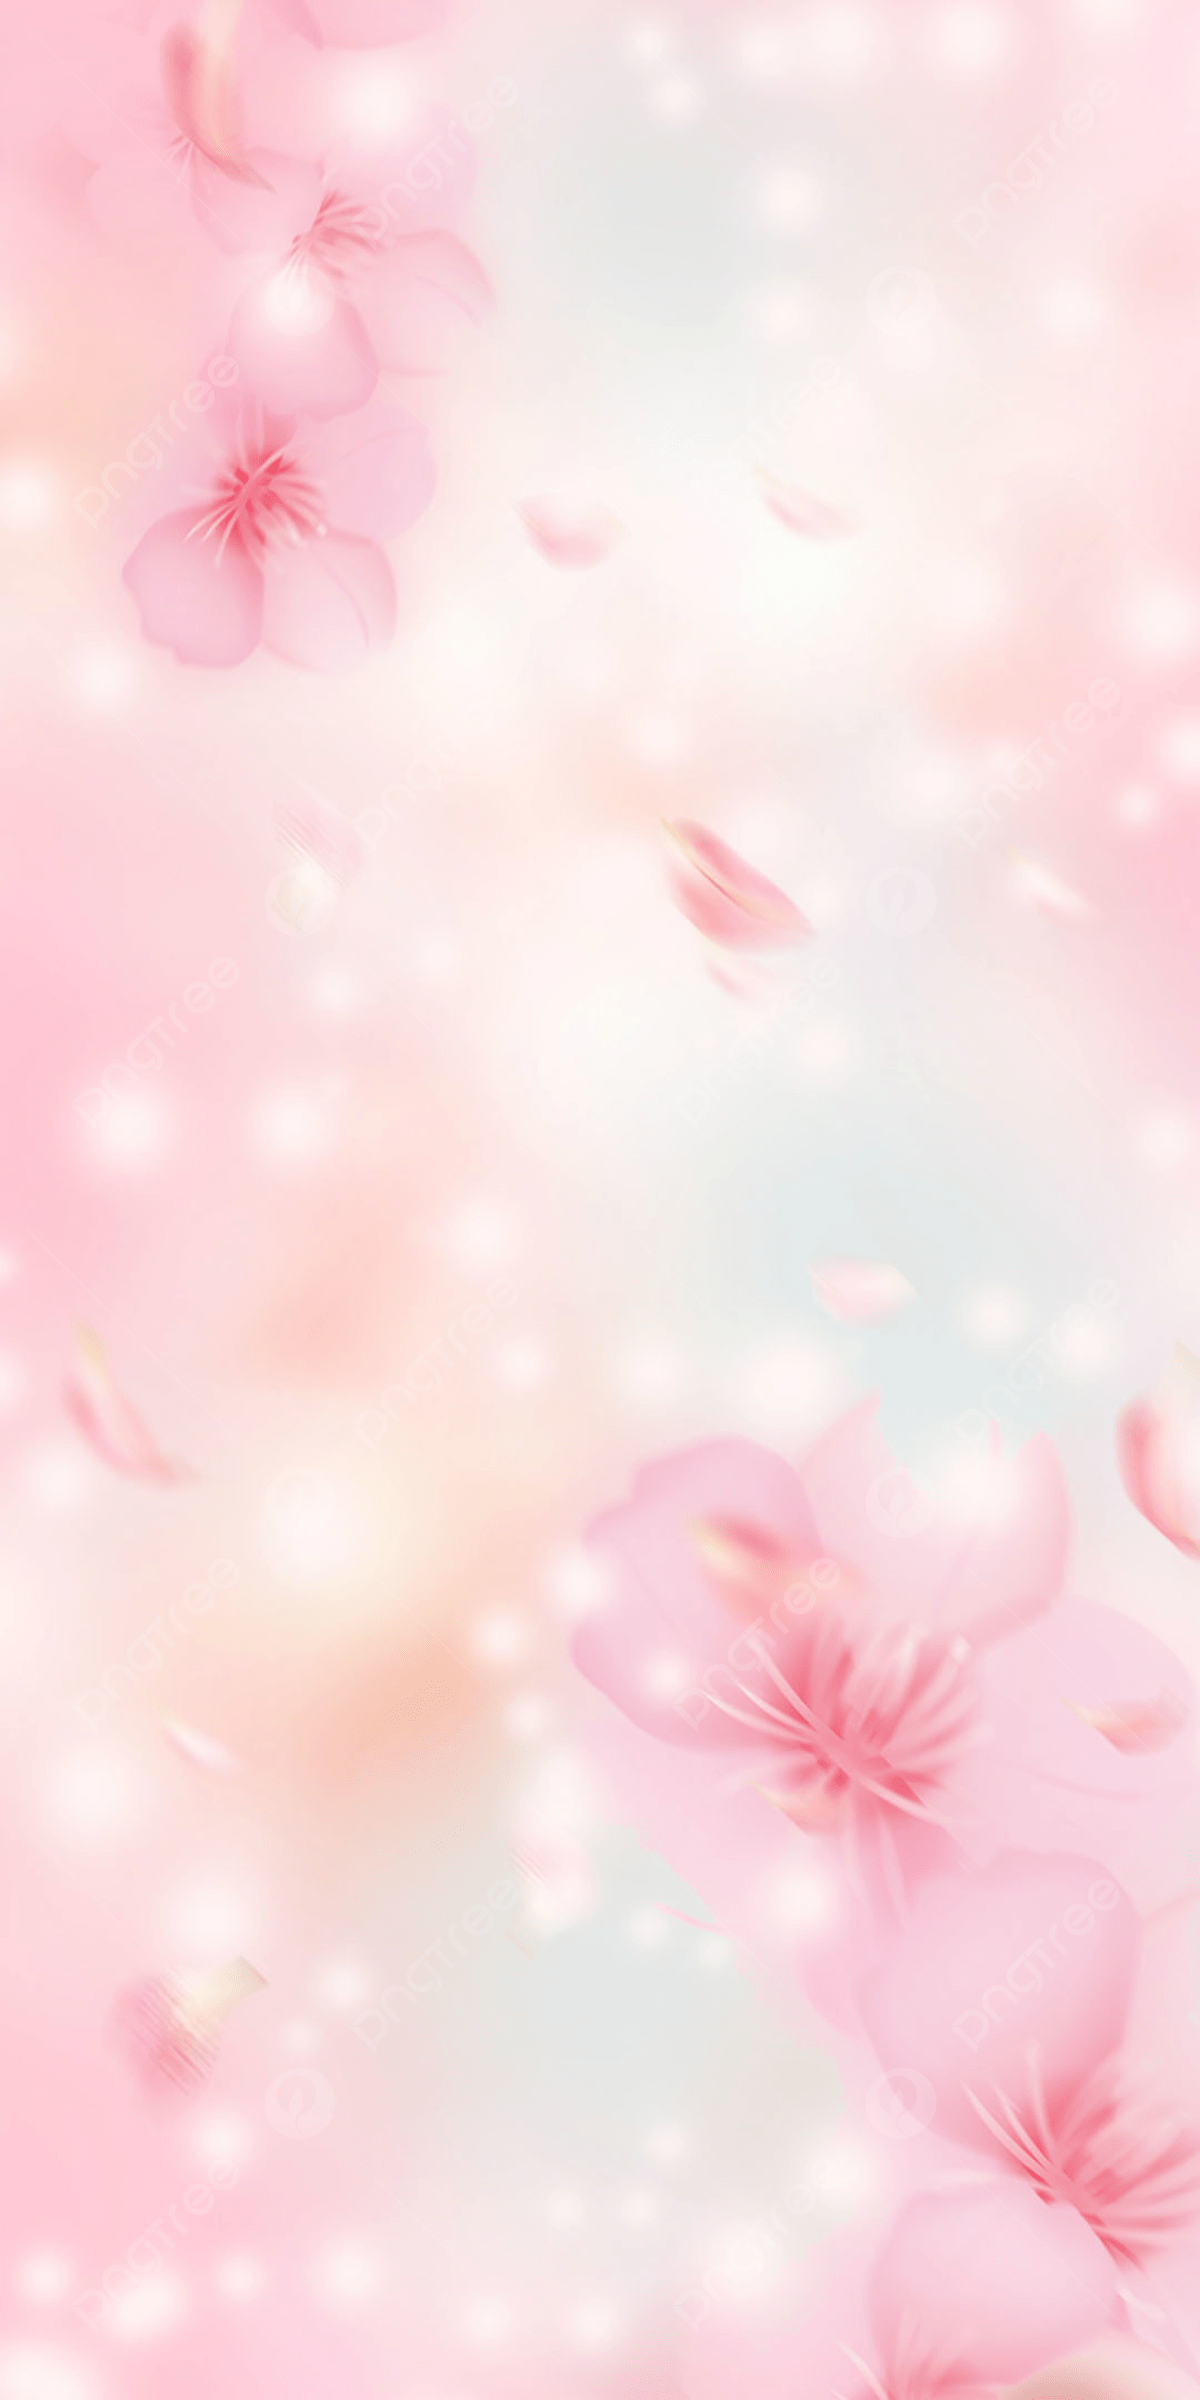 A pink flower background with bokeh - Sunshine